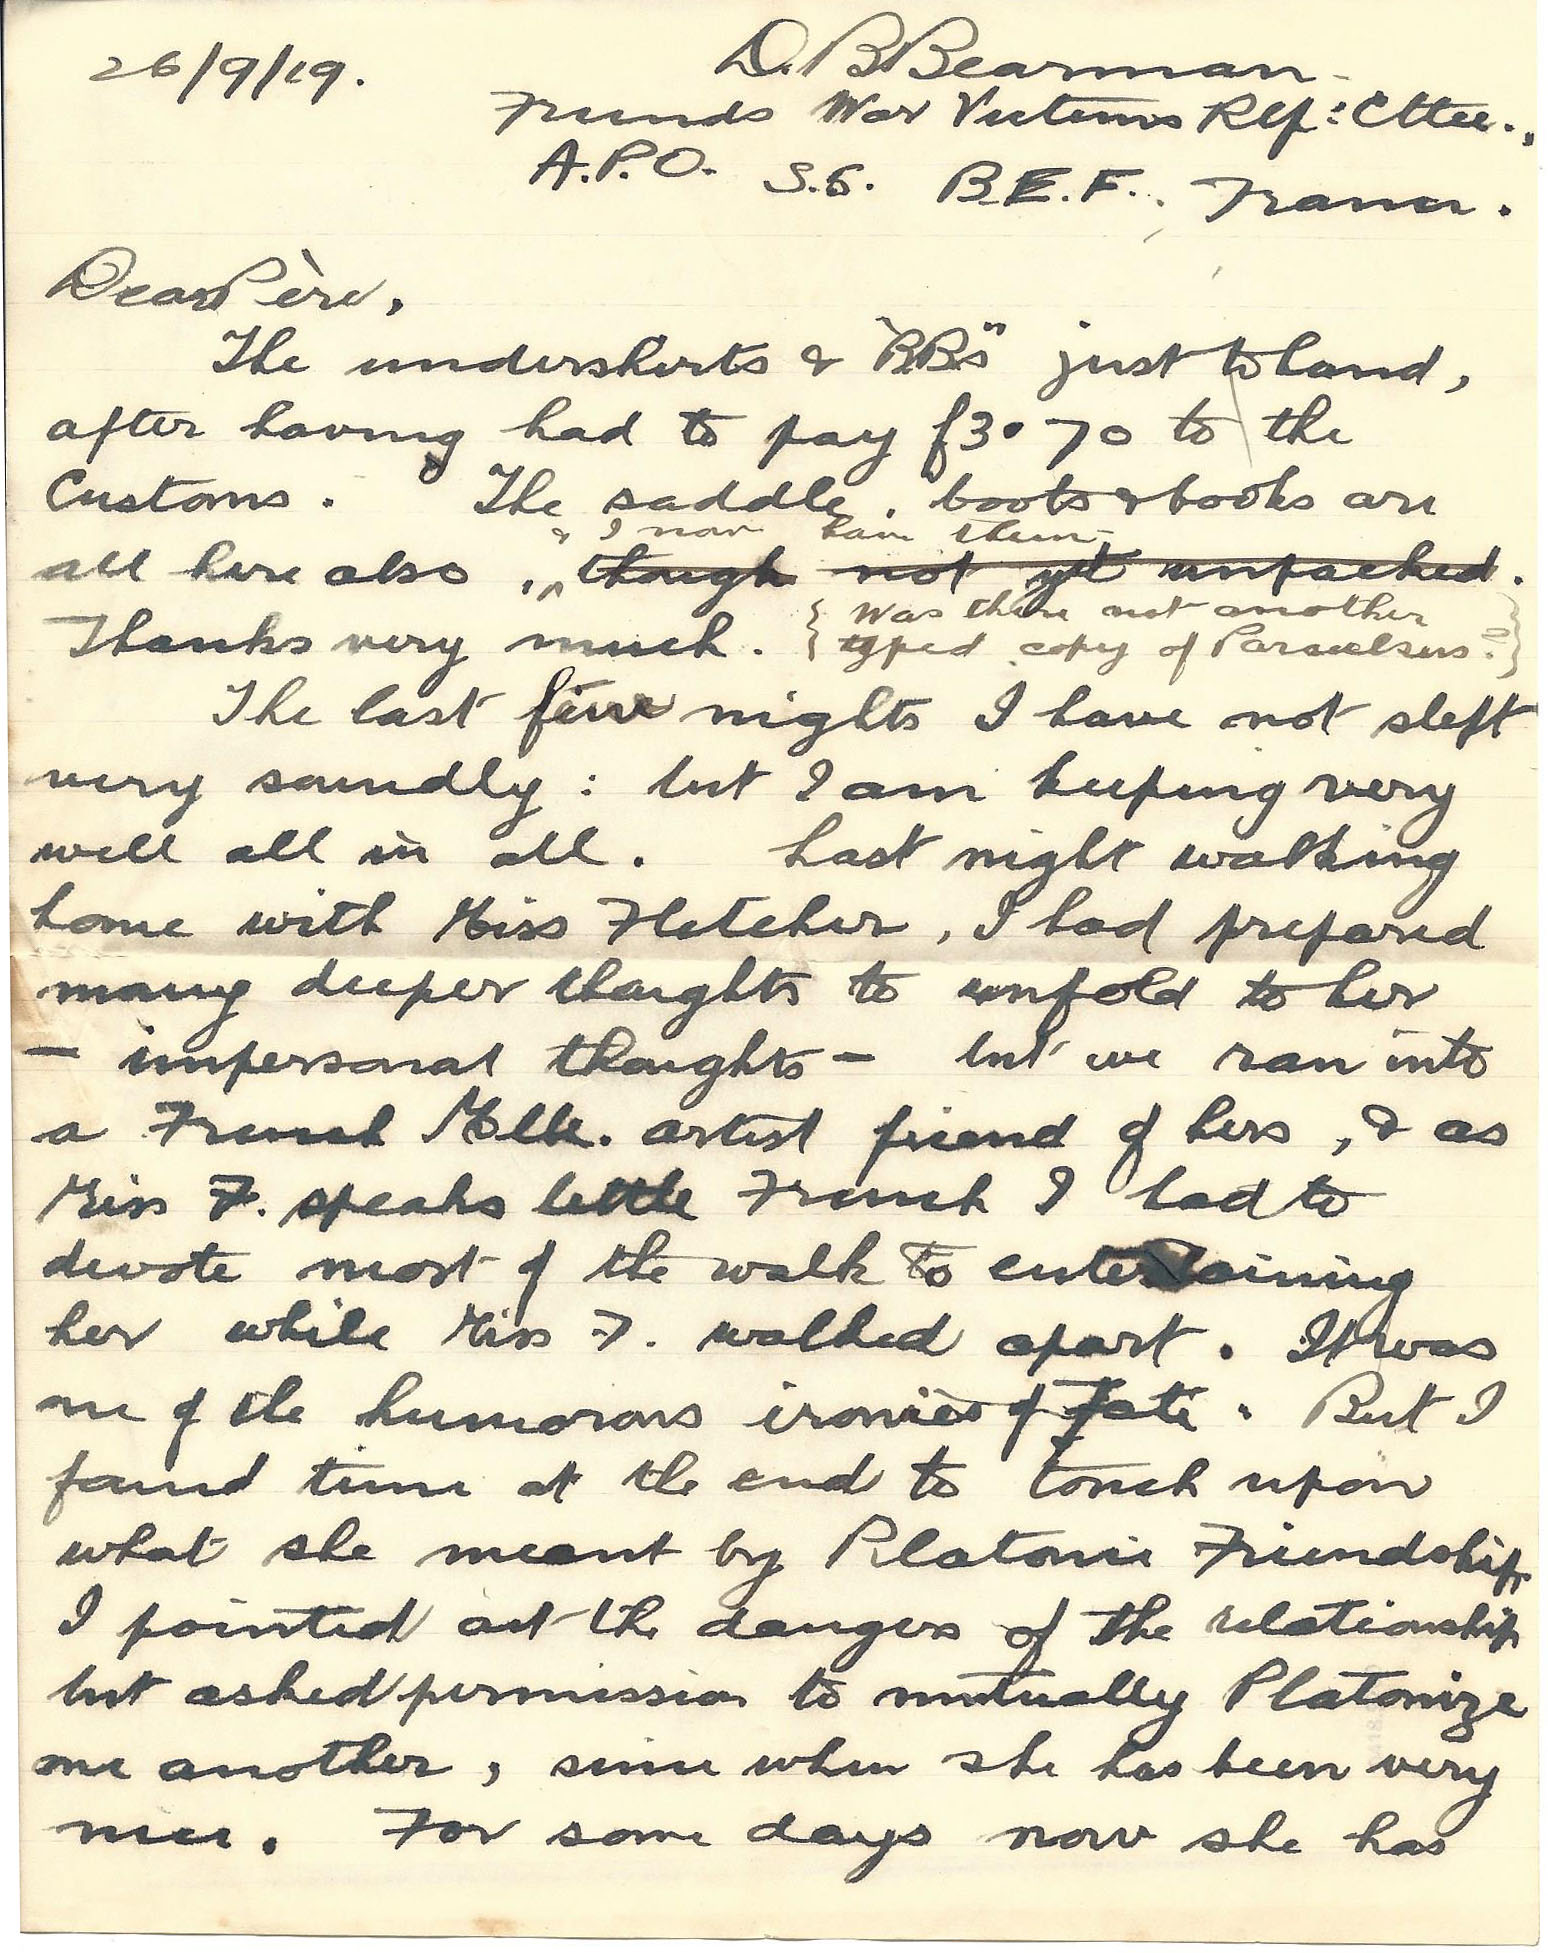 1920-09-26 p1 Donald Bearman letter to his father